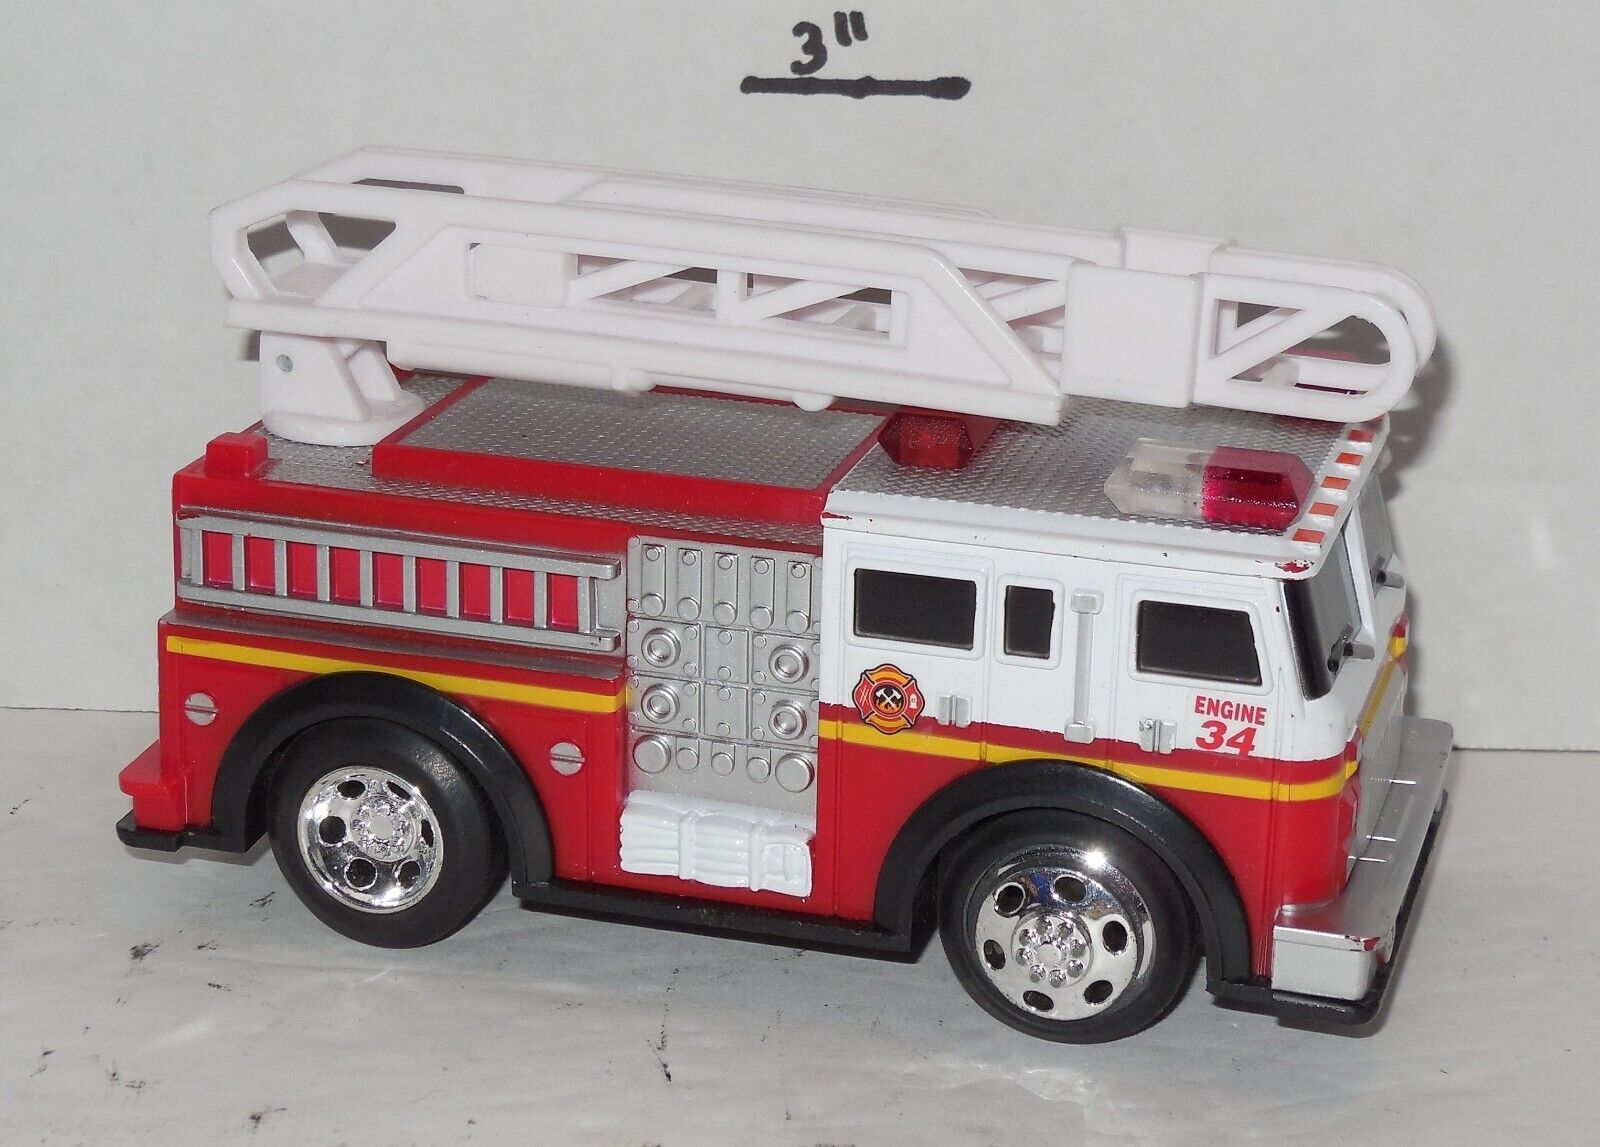 Toy State Road Rippers Rush & Rescue MINI Fire Truck Engine 34 Sirens Lights - $9.65